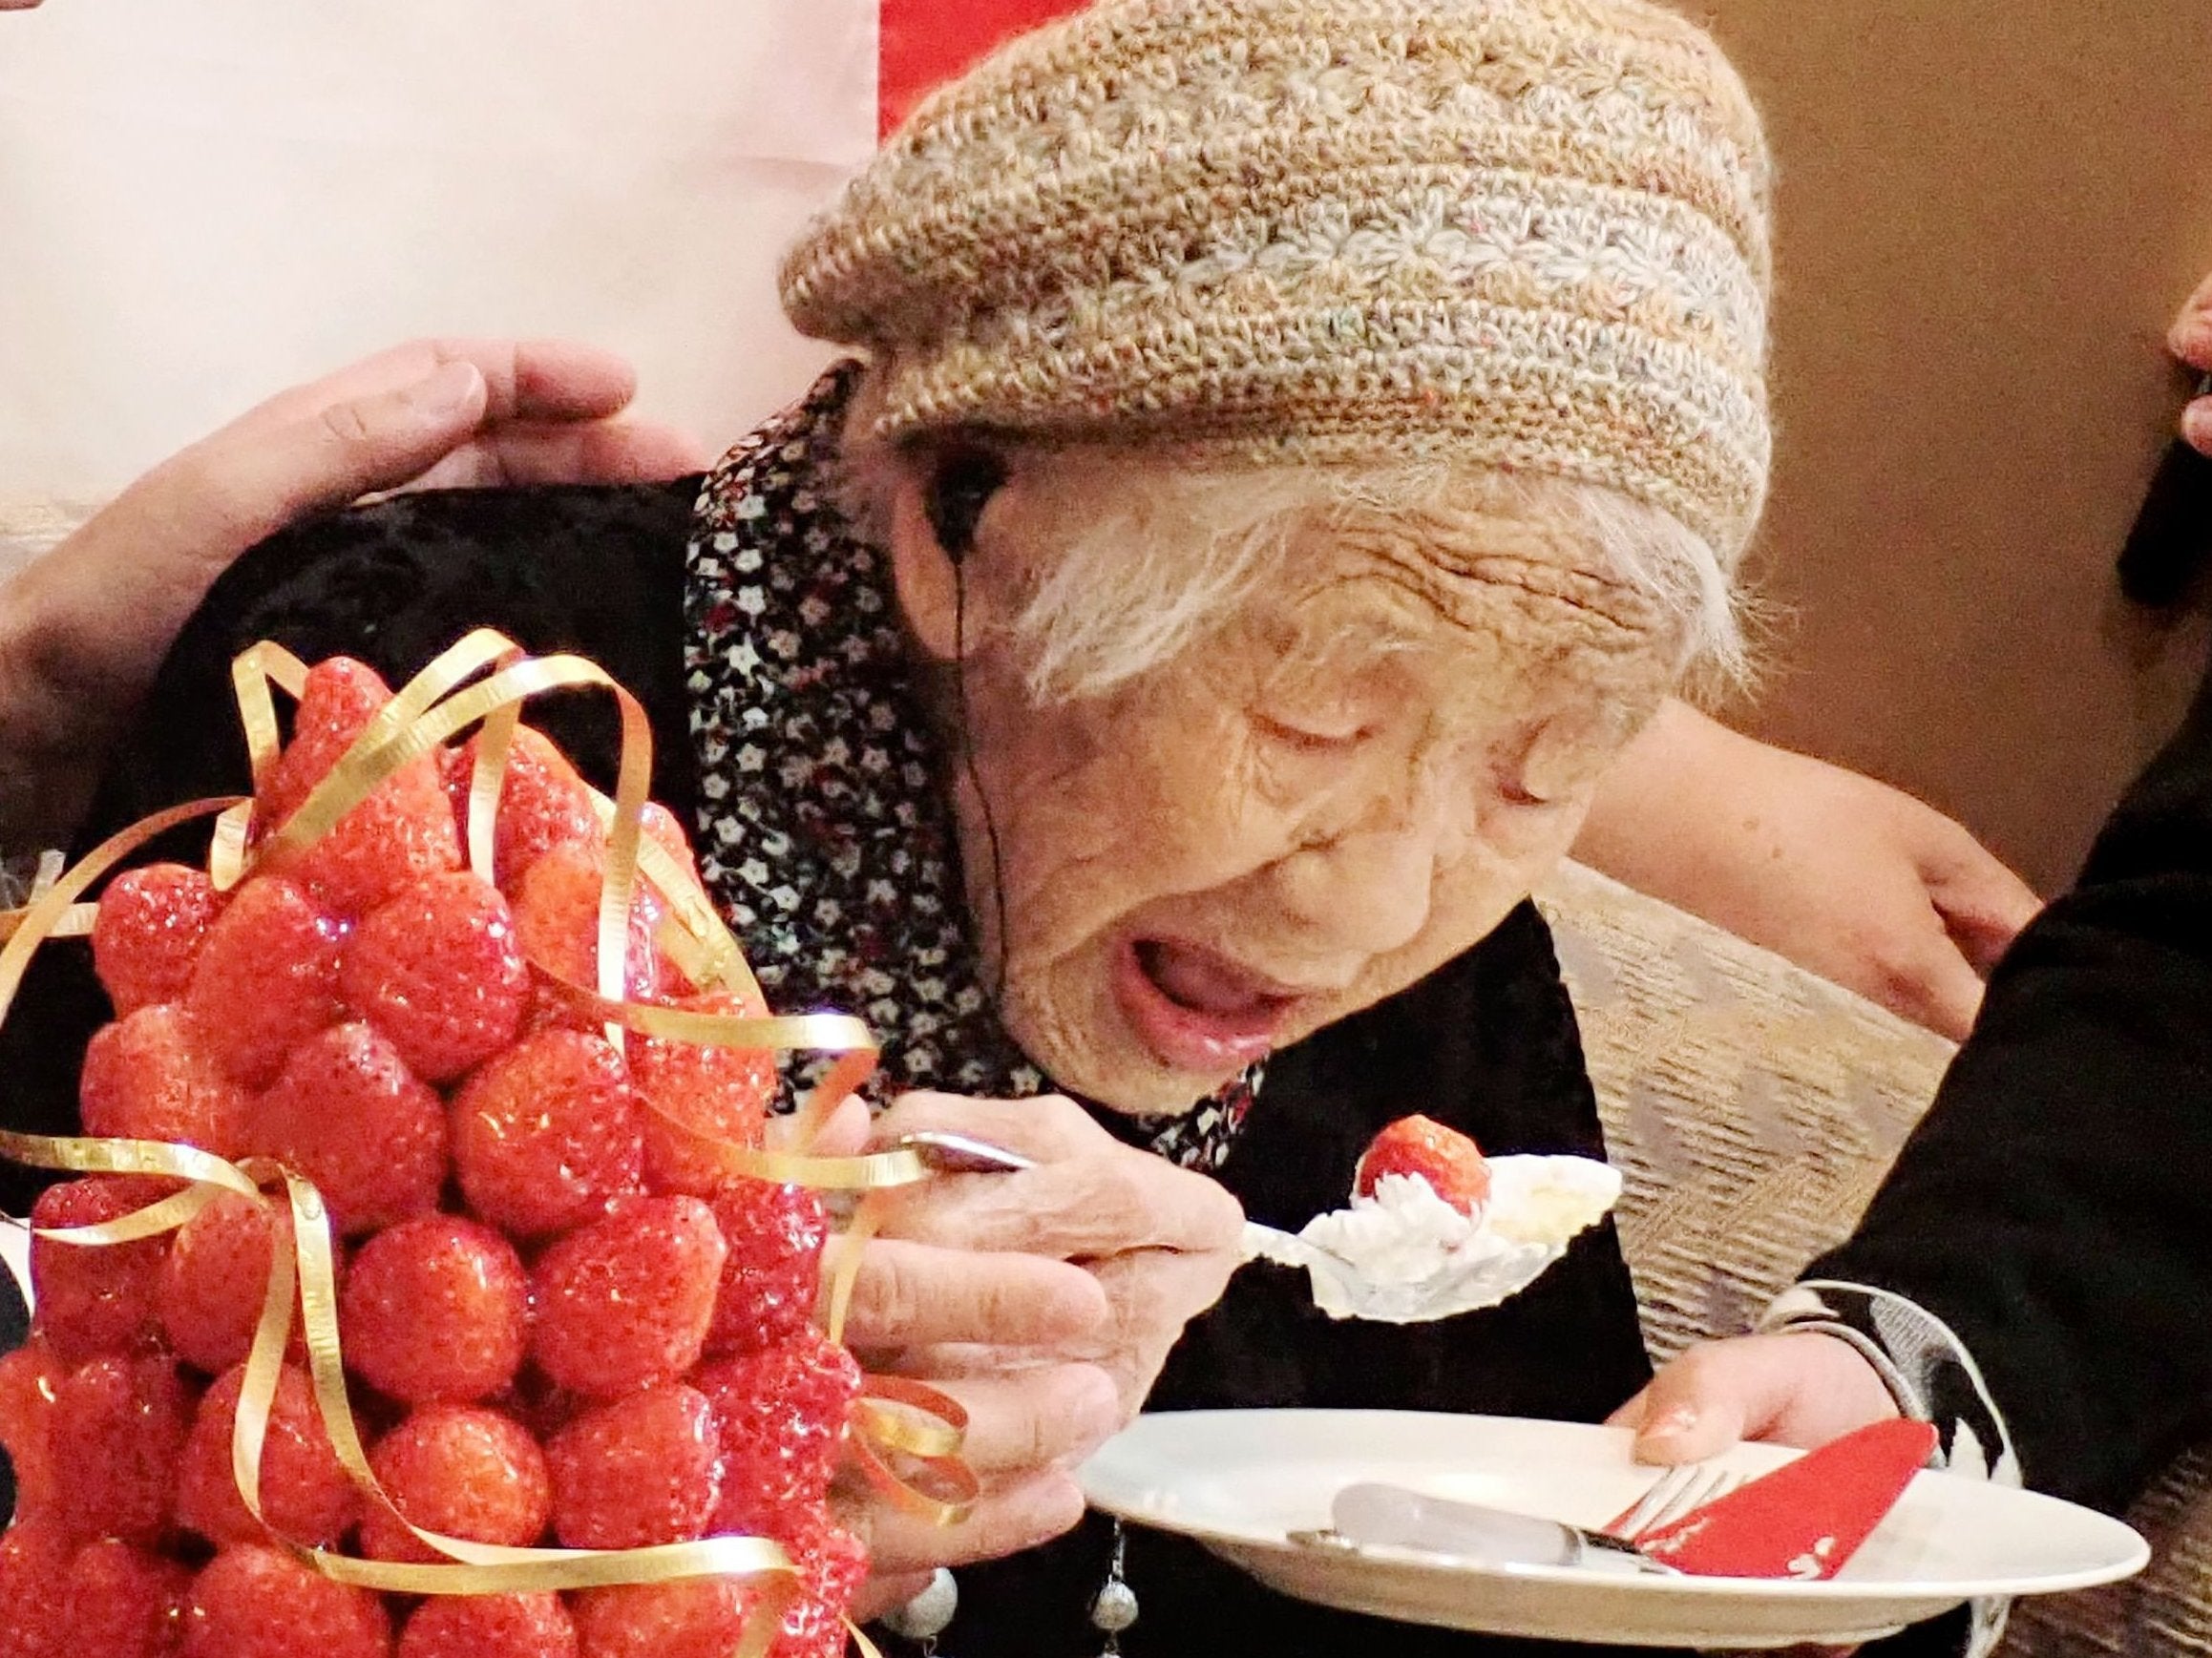 Kane Tanaka celebrates as she is officially recognised as the world's oldest living person